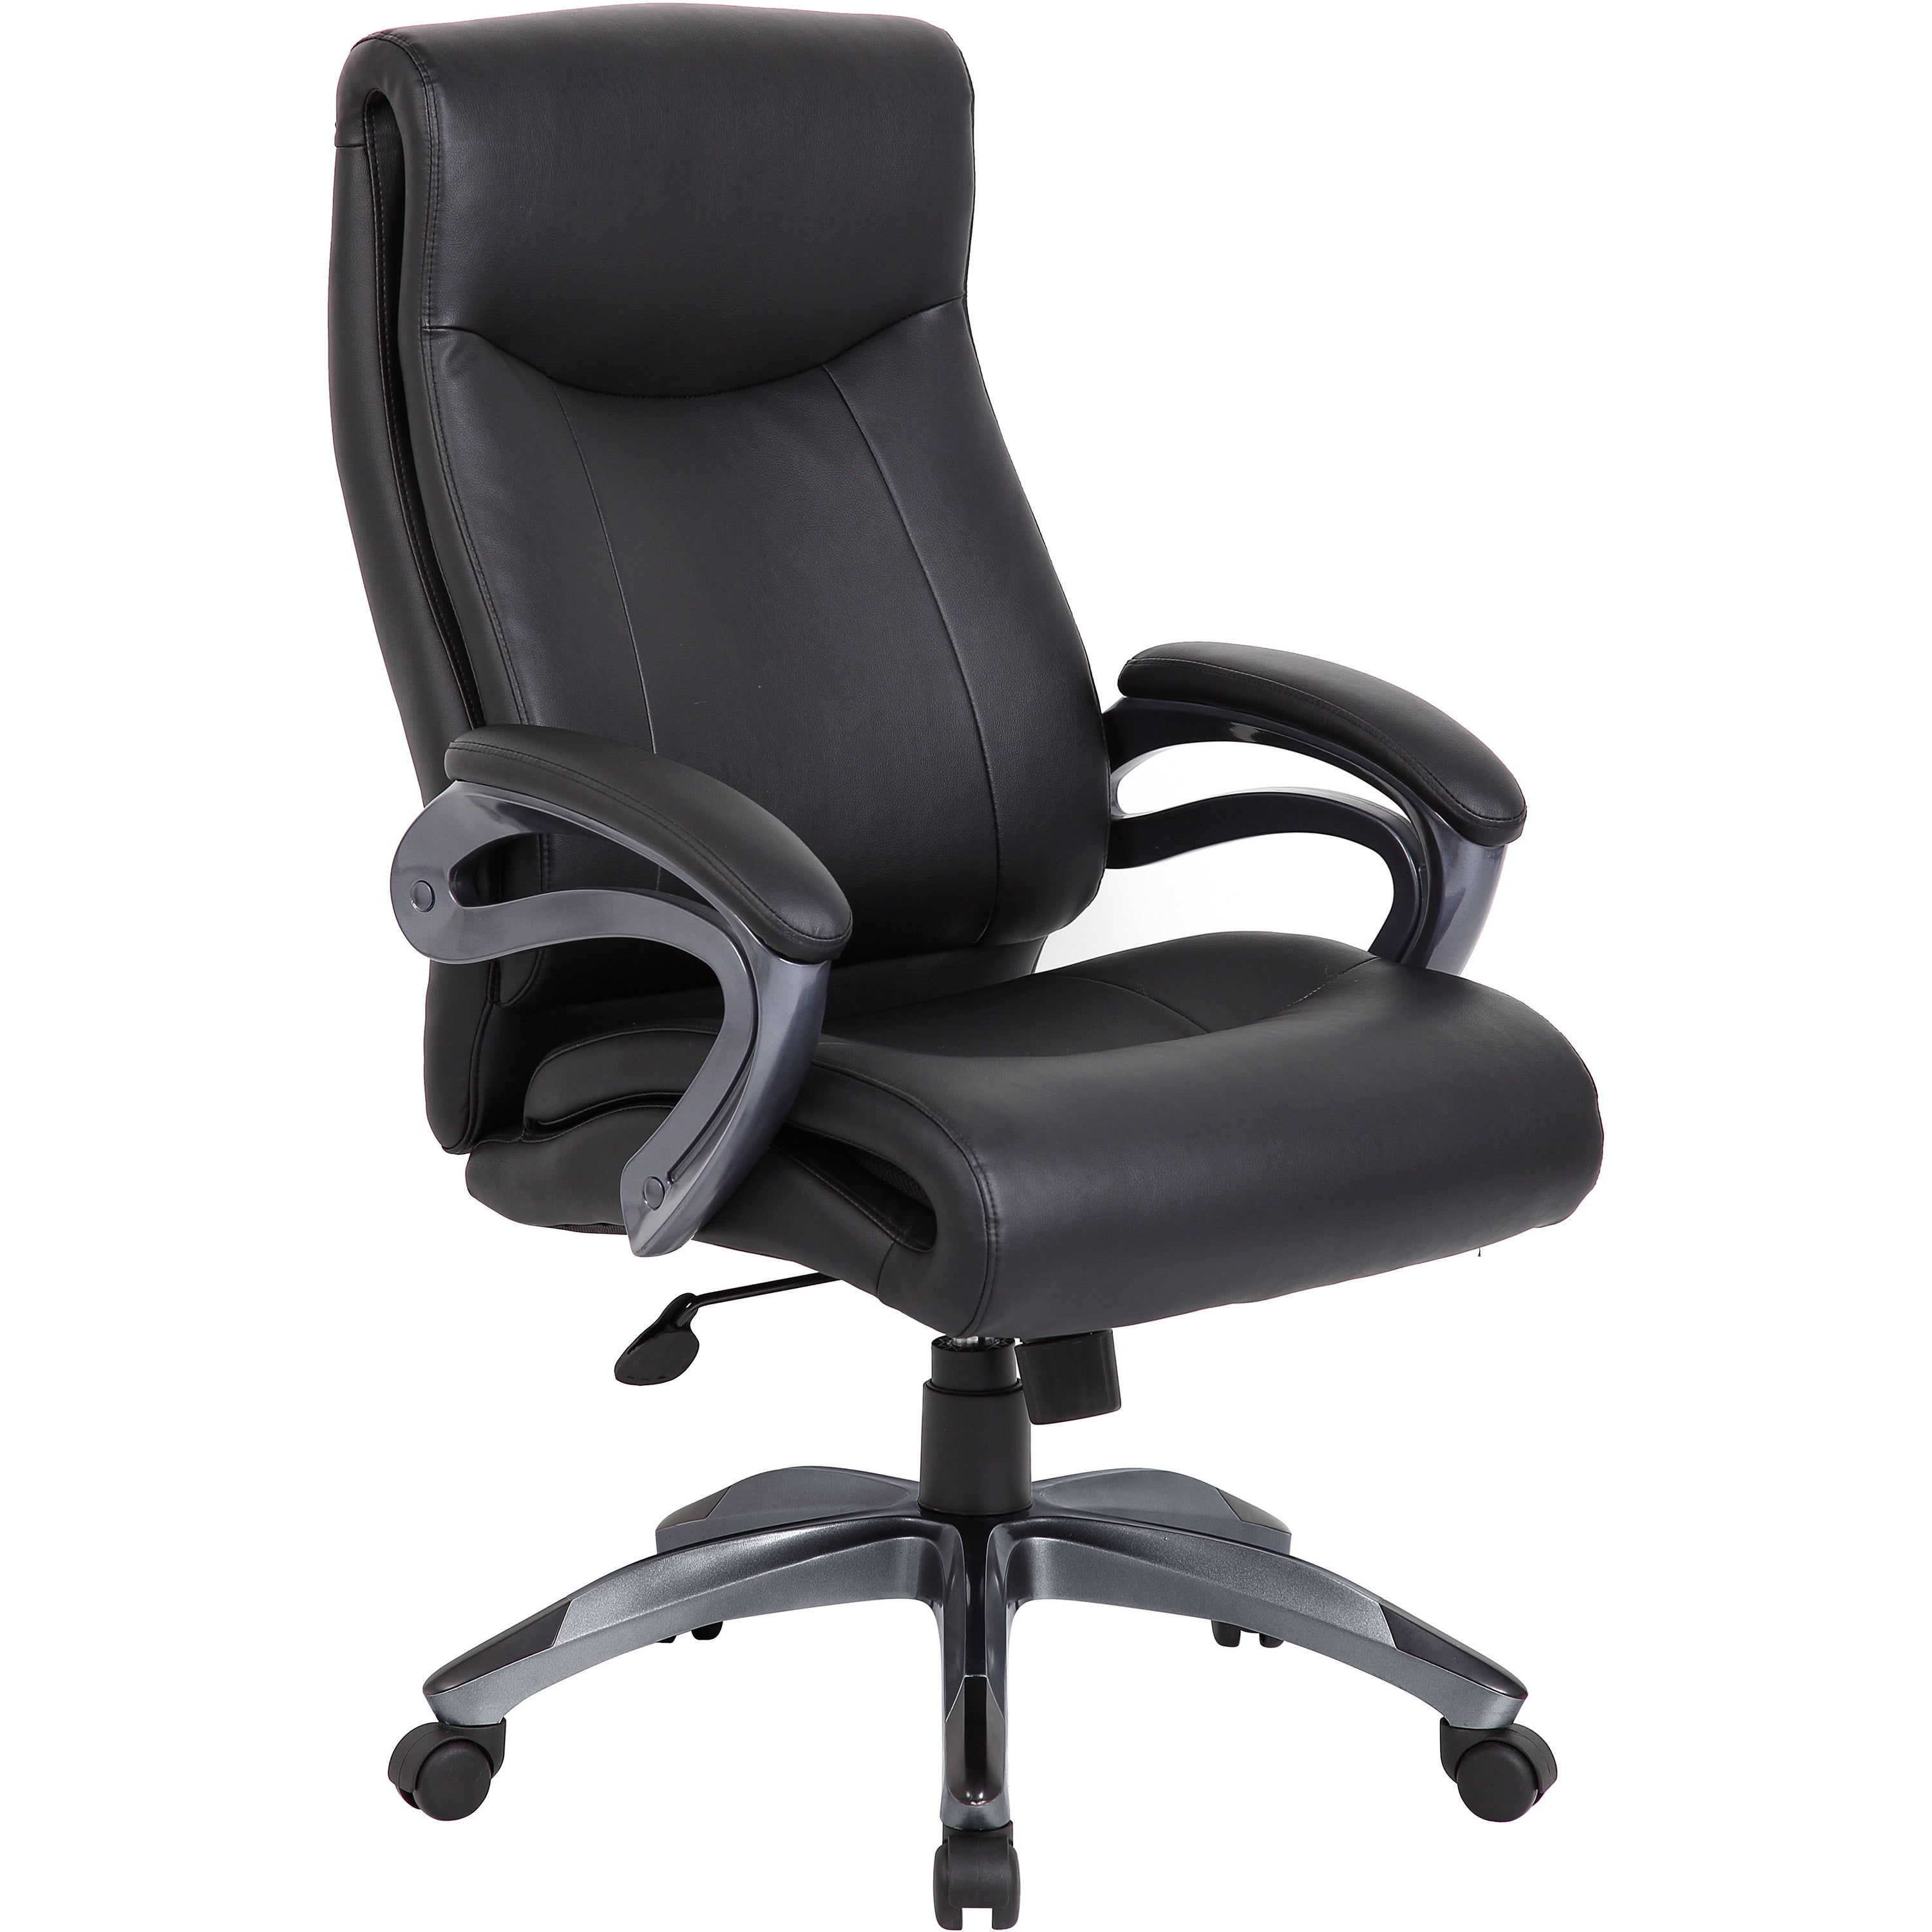 Double Layer Executive Chair, B8661